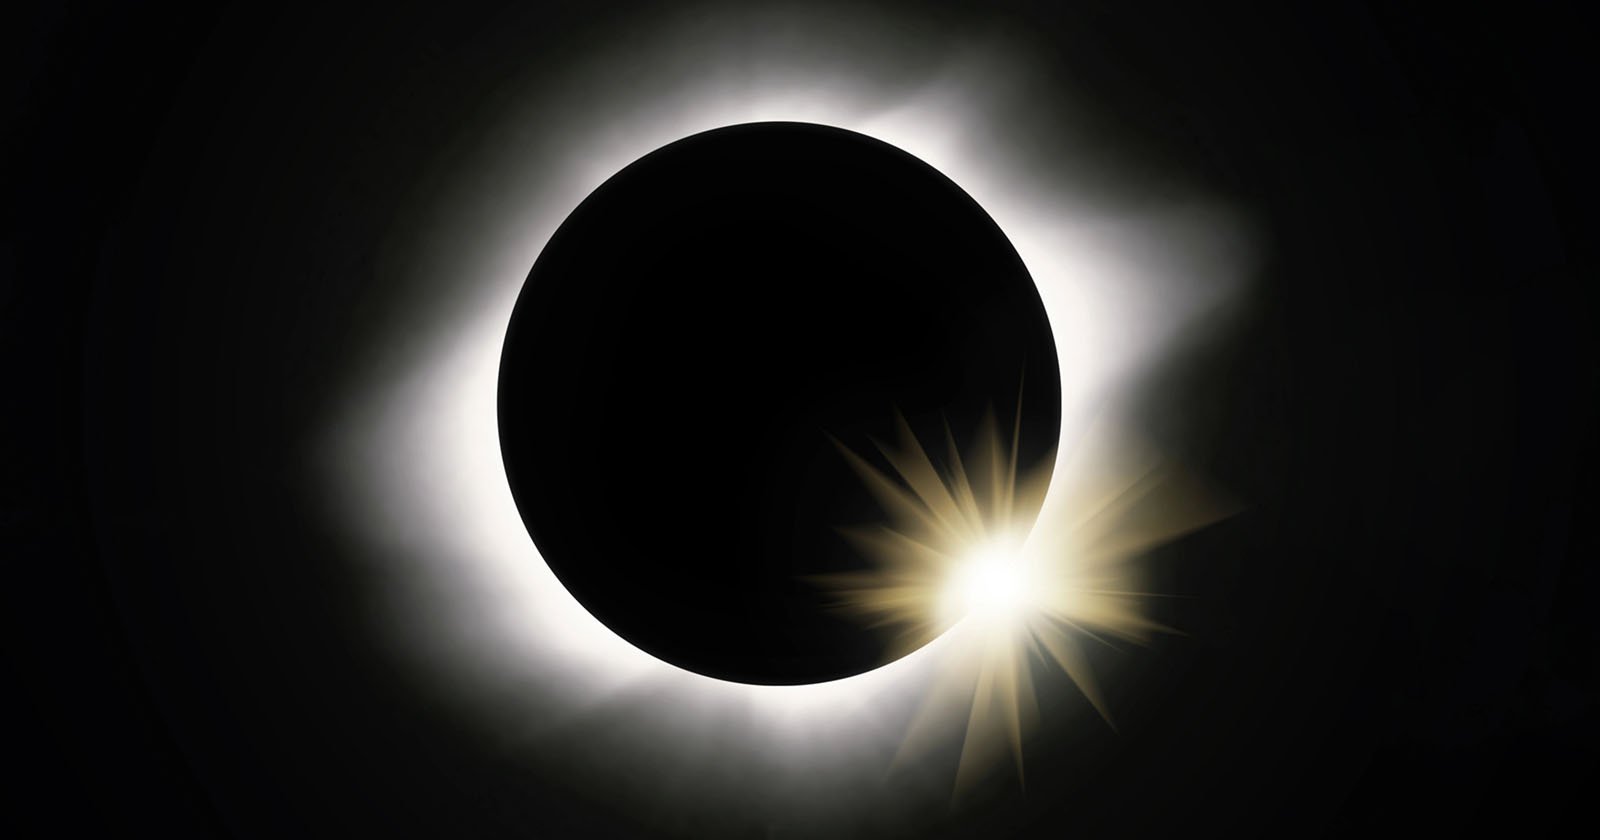 Delta Air Lines to Offer Special Flight Along the Solar Eclipse Path